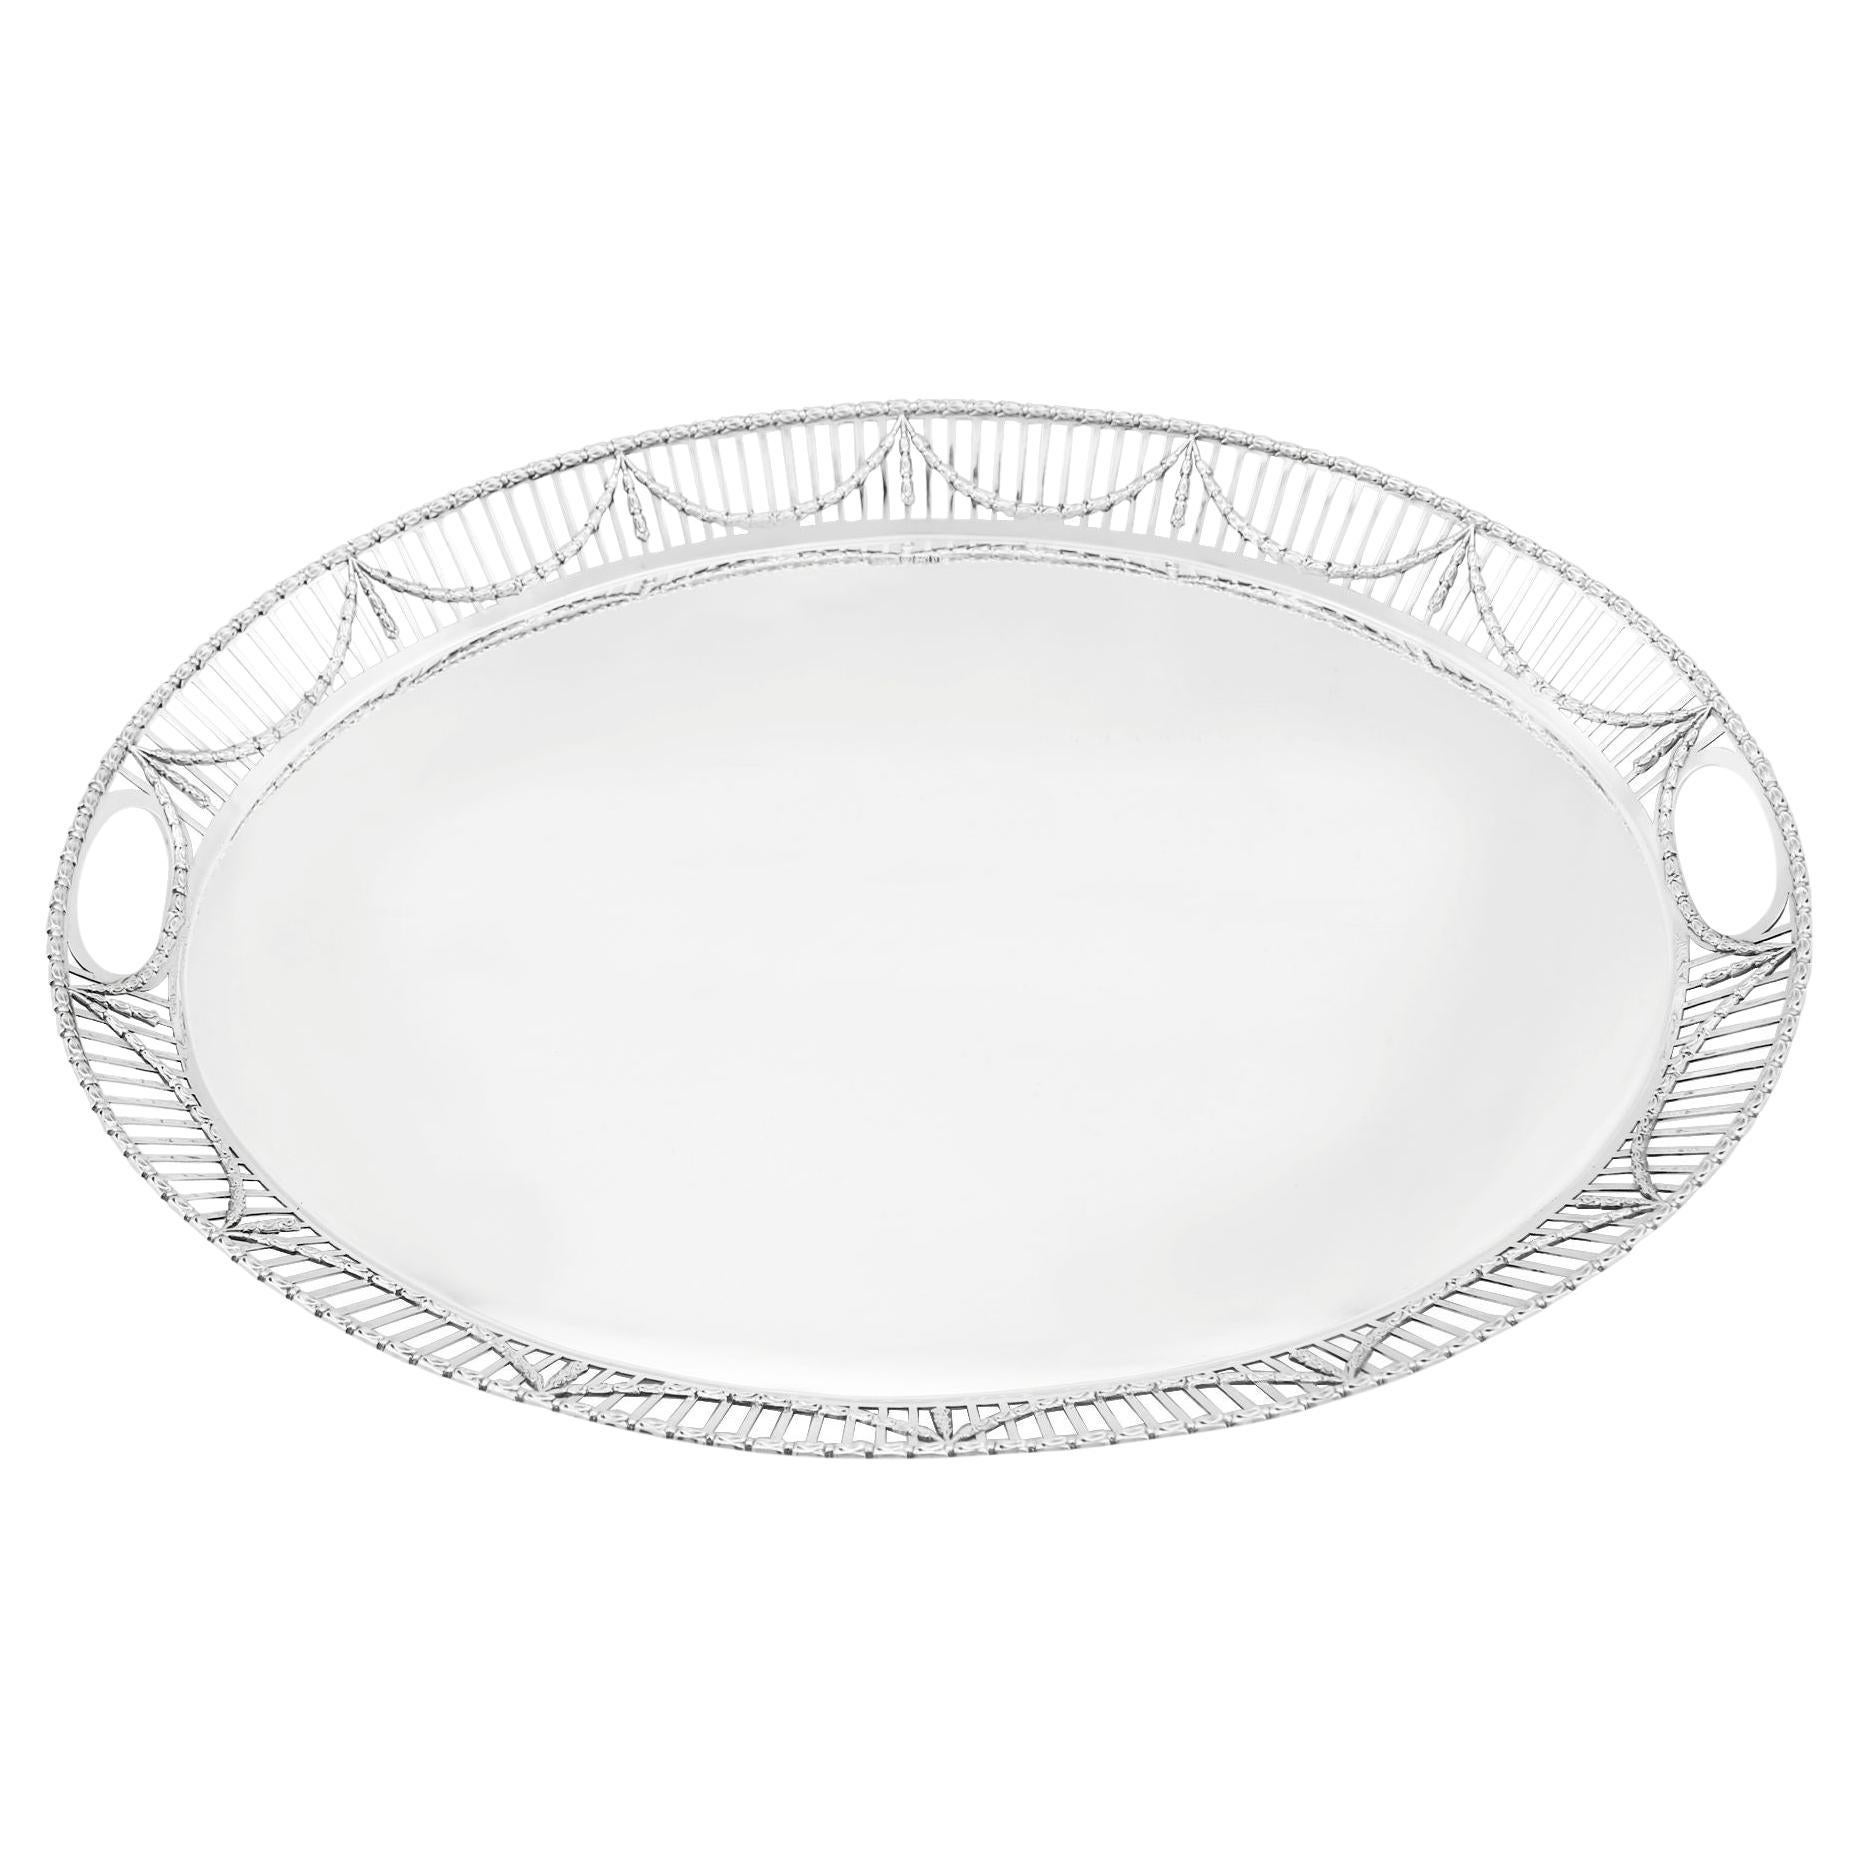 Antique Sterling Silver Galleried Tray